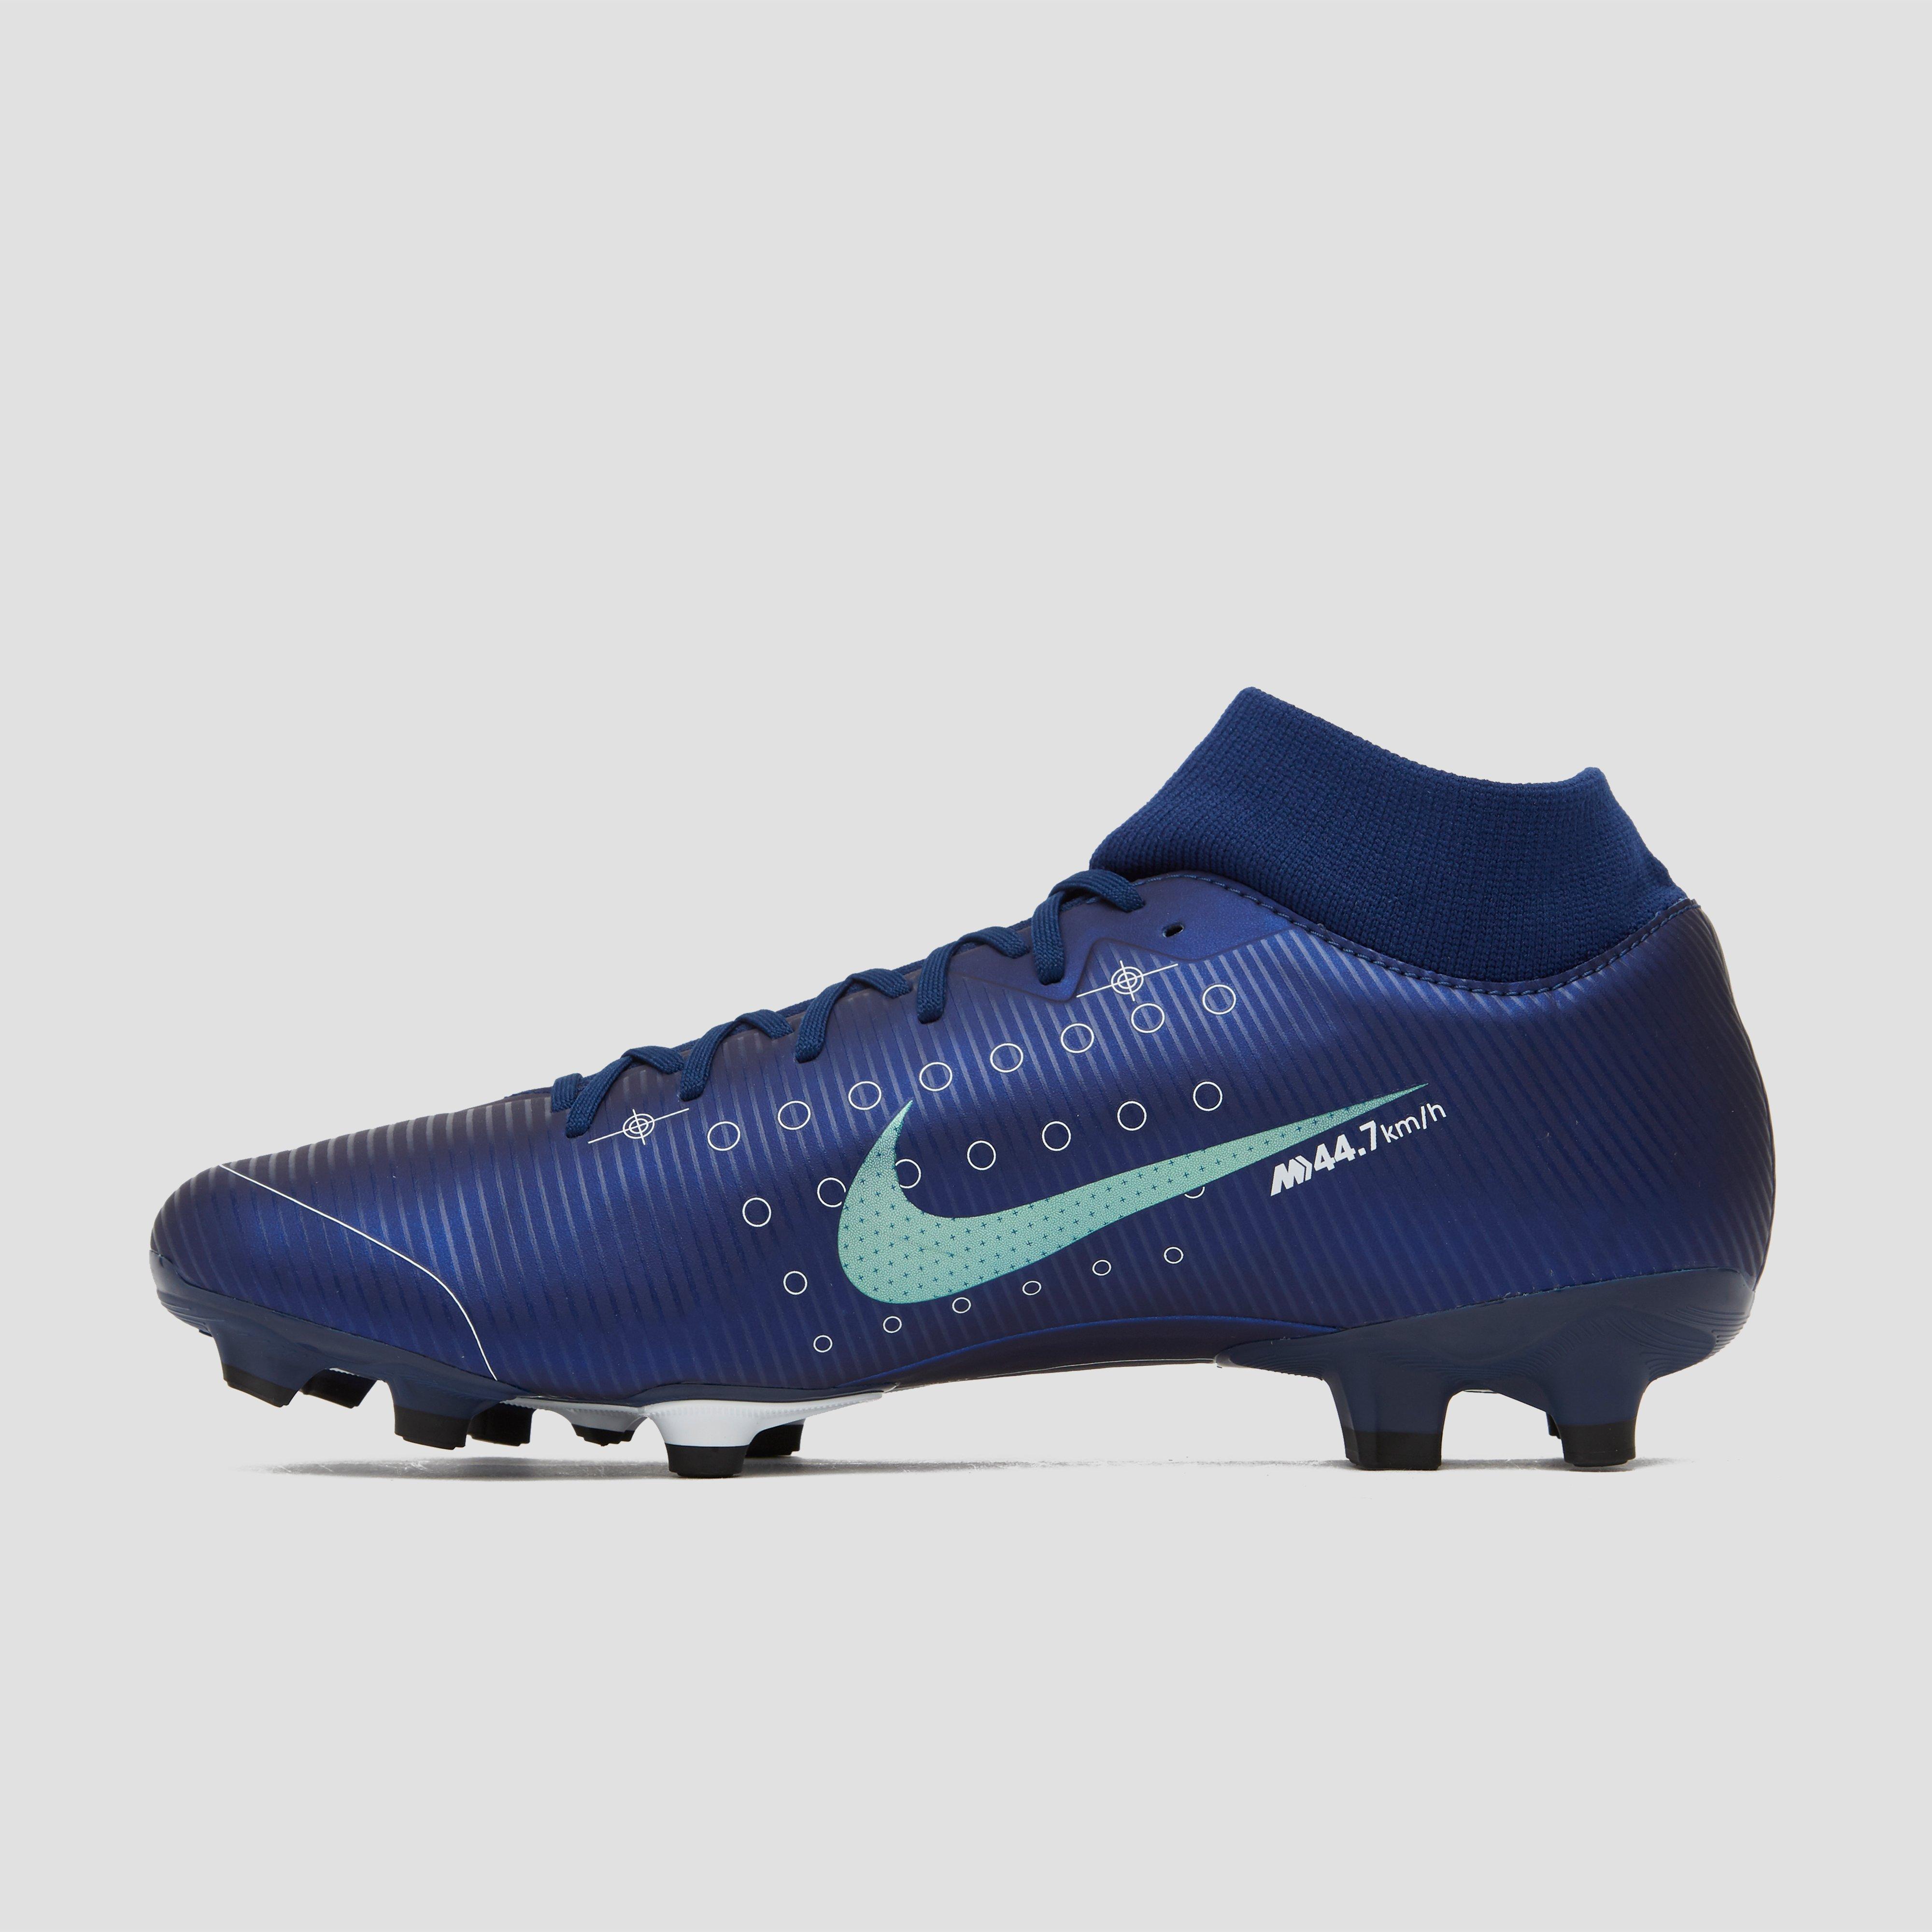 Nike Mercurial Superfly 7 Academy MDS.